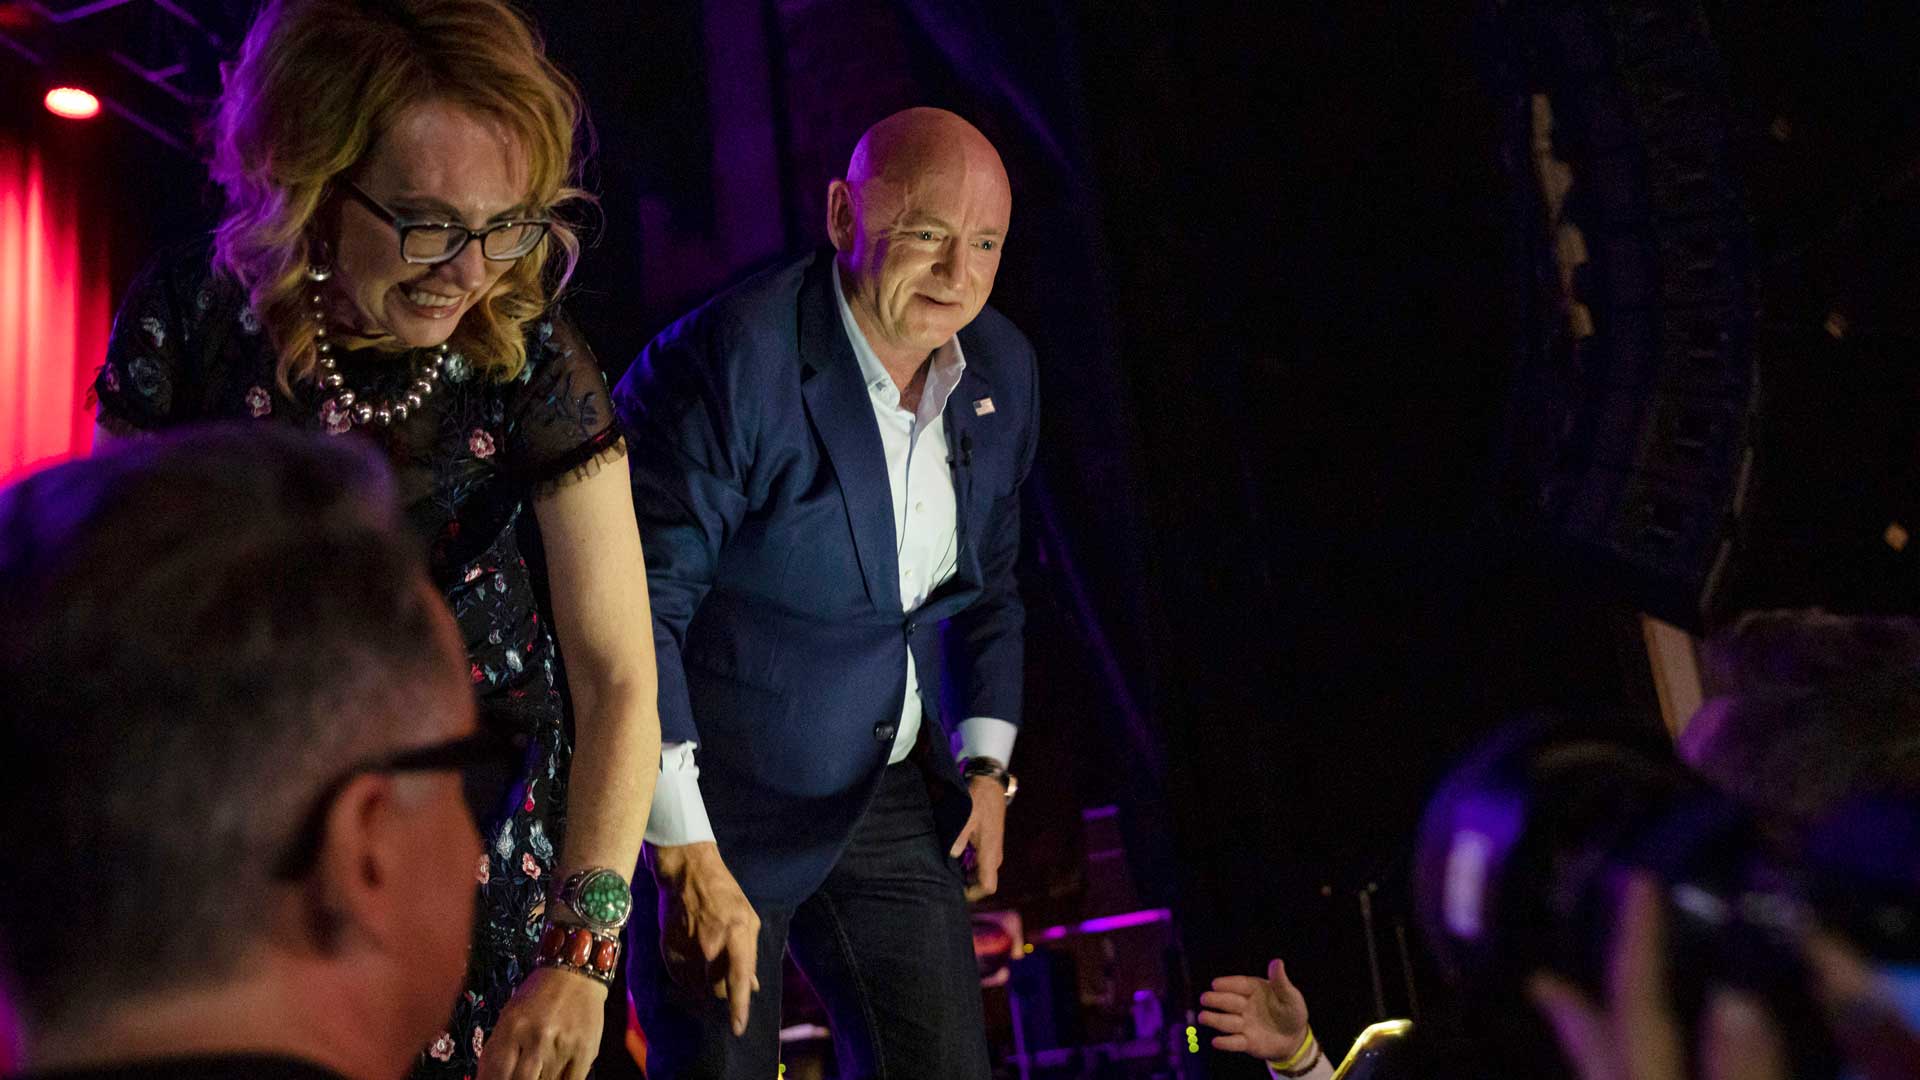 Sen. Mark Kelly, D-Ariz., with his wife former Rep. Gabrielle Giffords greets supporters at an election night event in Tucson, Ariz., Tuesday, Nov. 8, 2022.